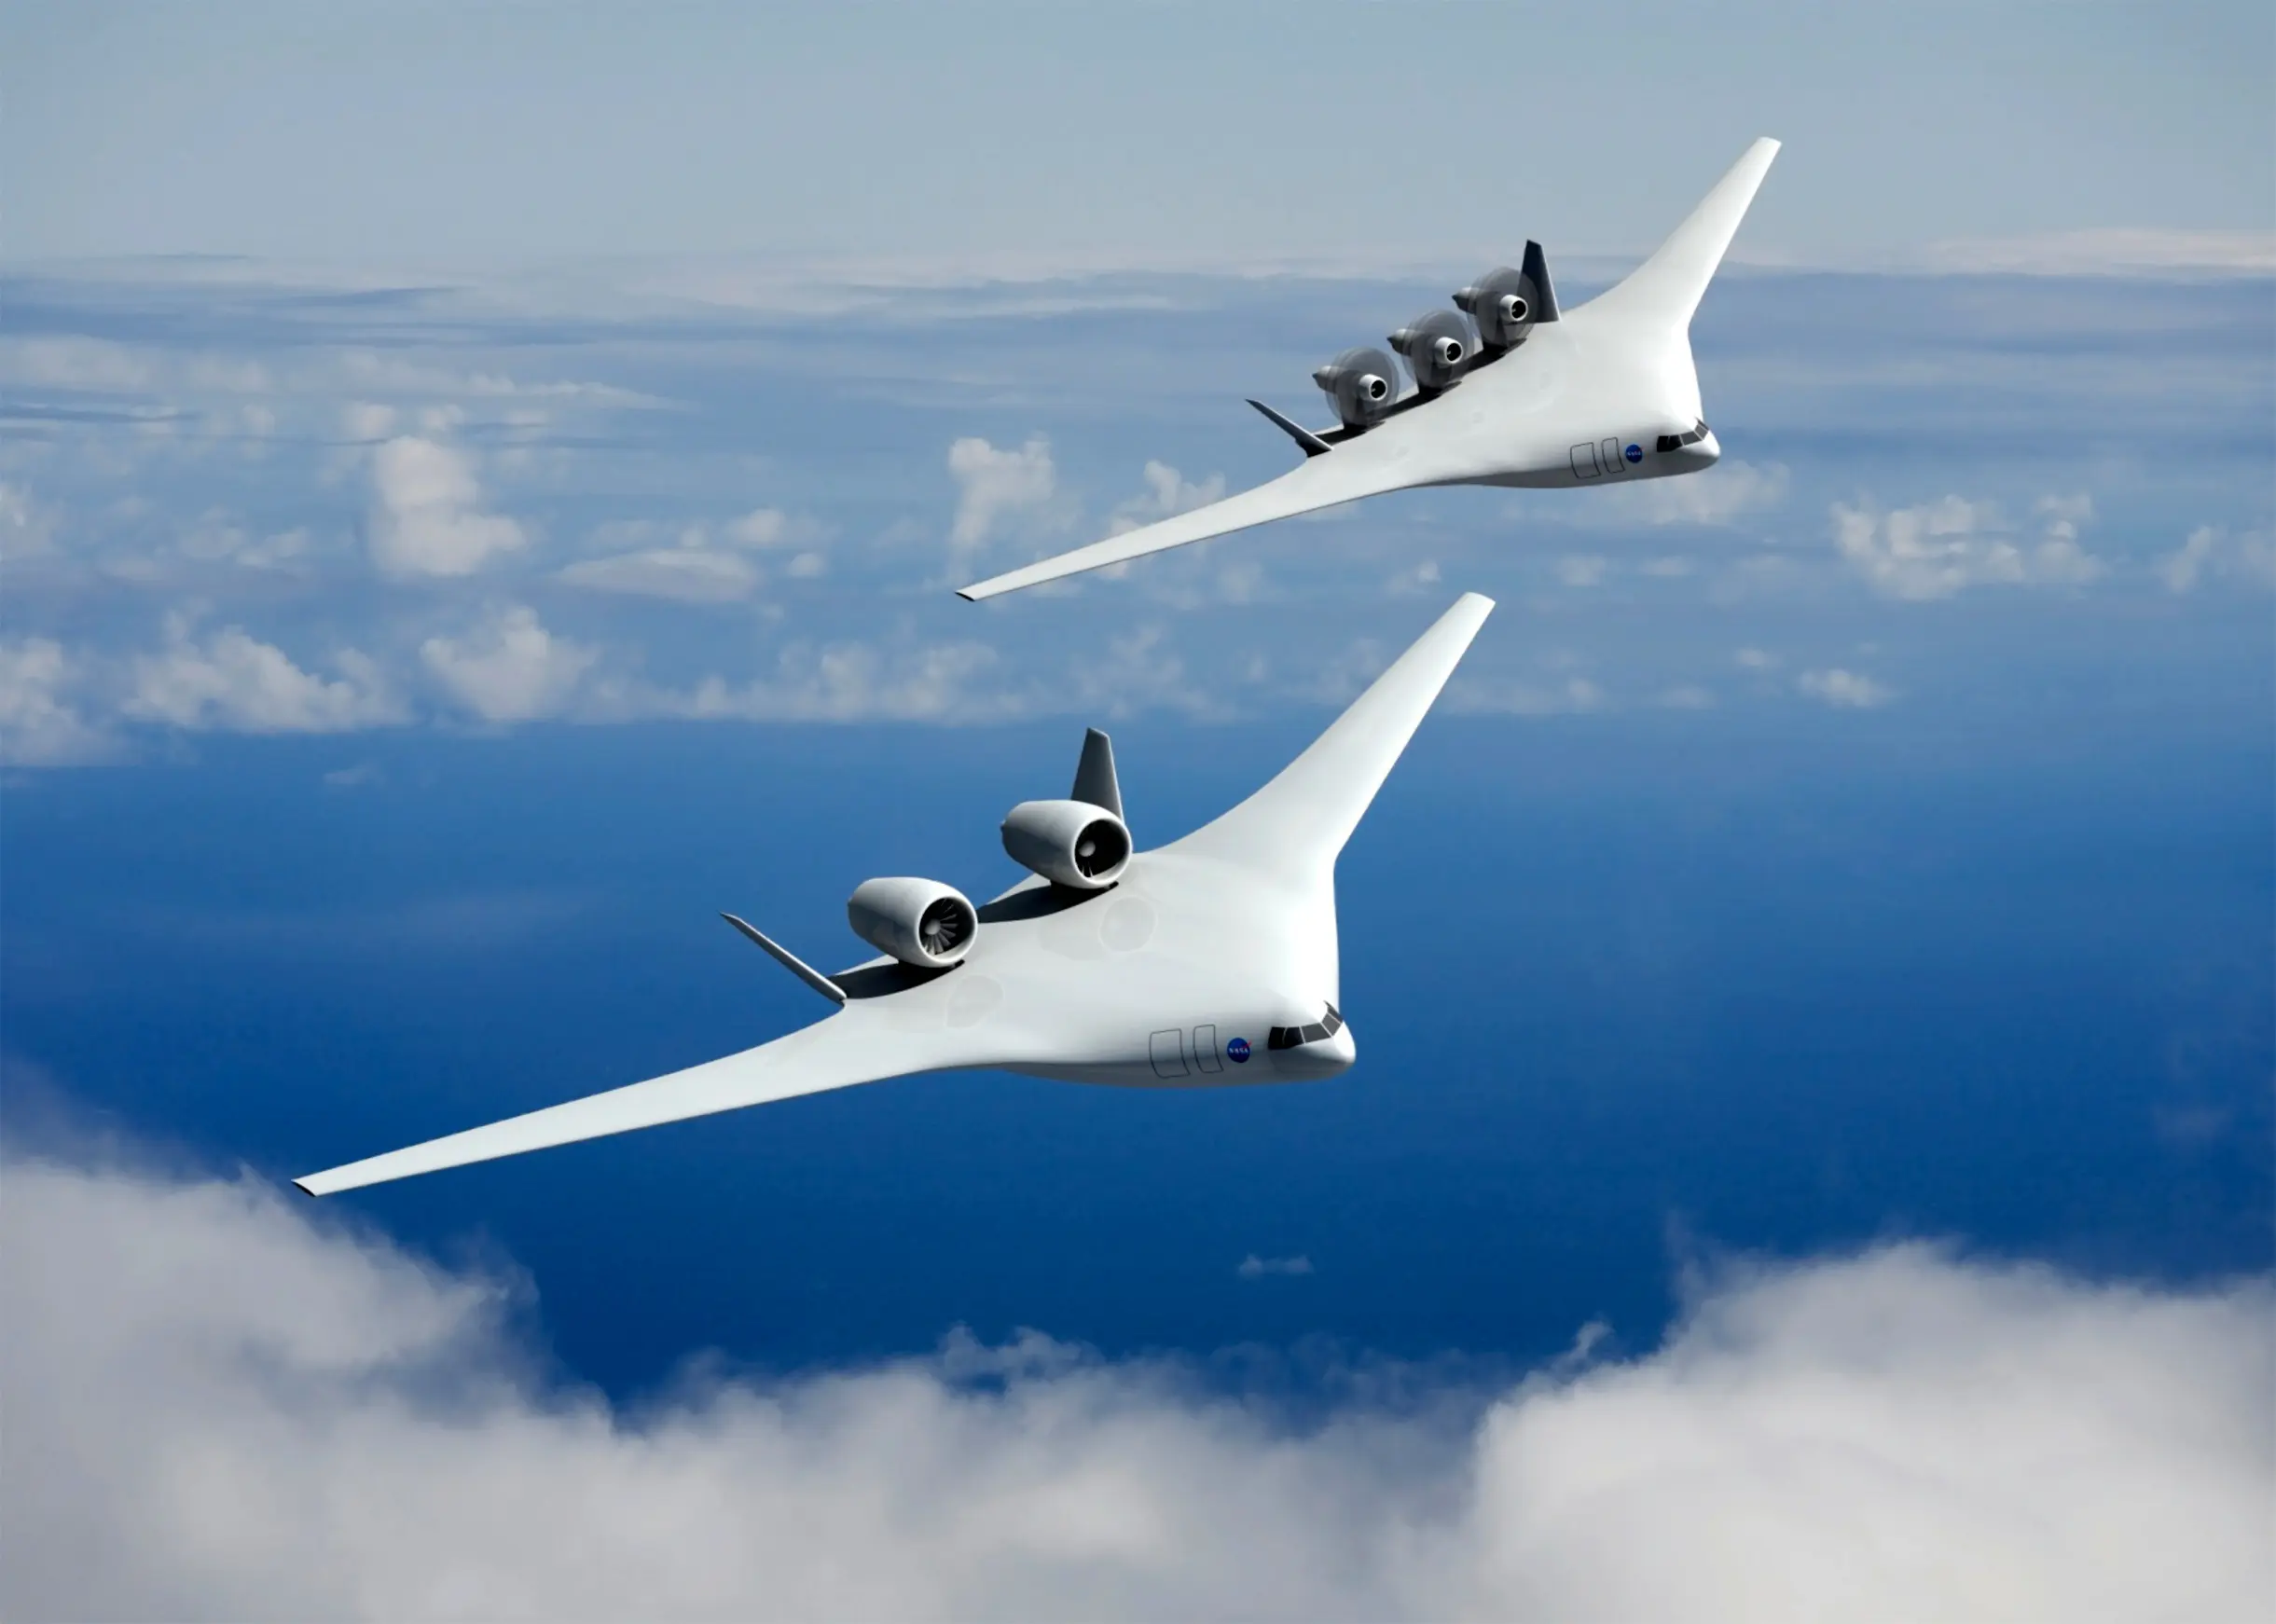 7 Future Aircraft Concepts That Could Change Aviation